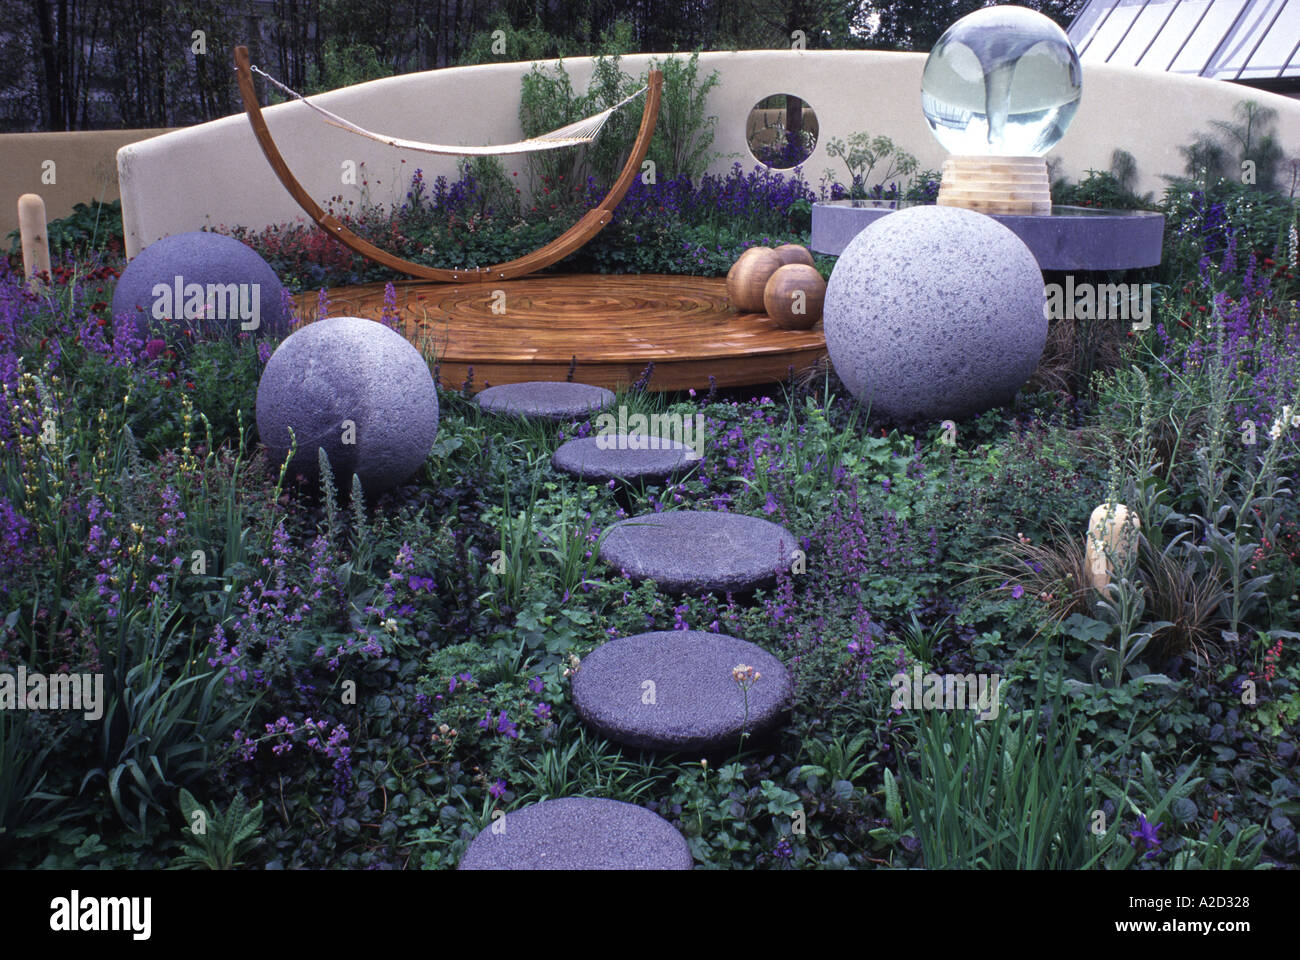 Elavation Garden The garden is based on the theme of an outdoor room that evokes the feeling of elevation and lightness Globe w Stock Photo